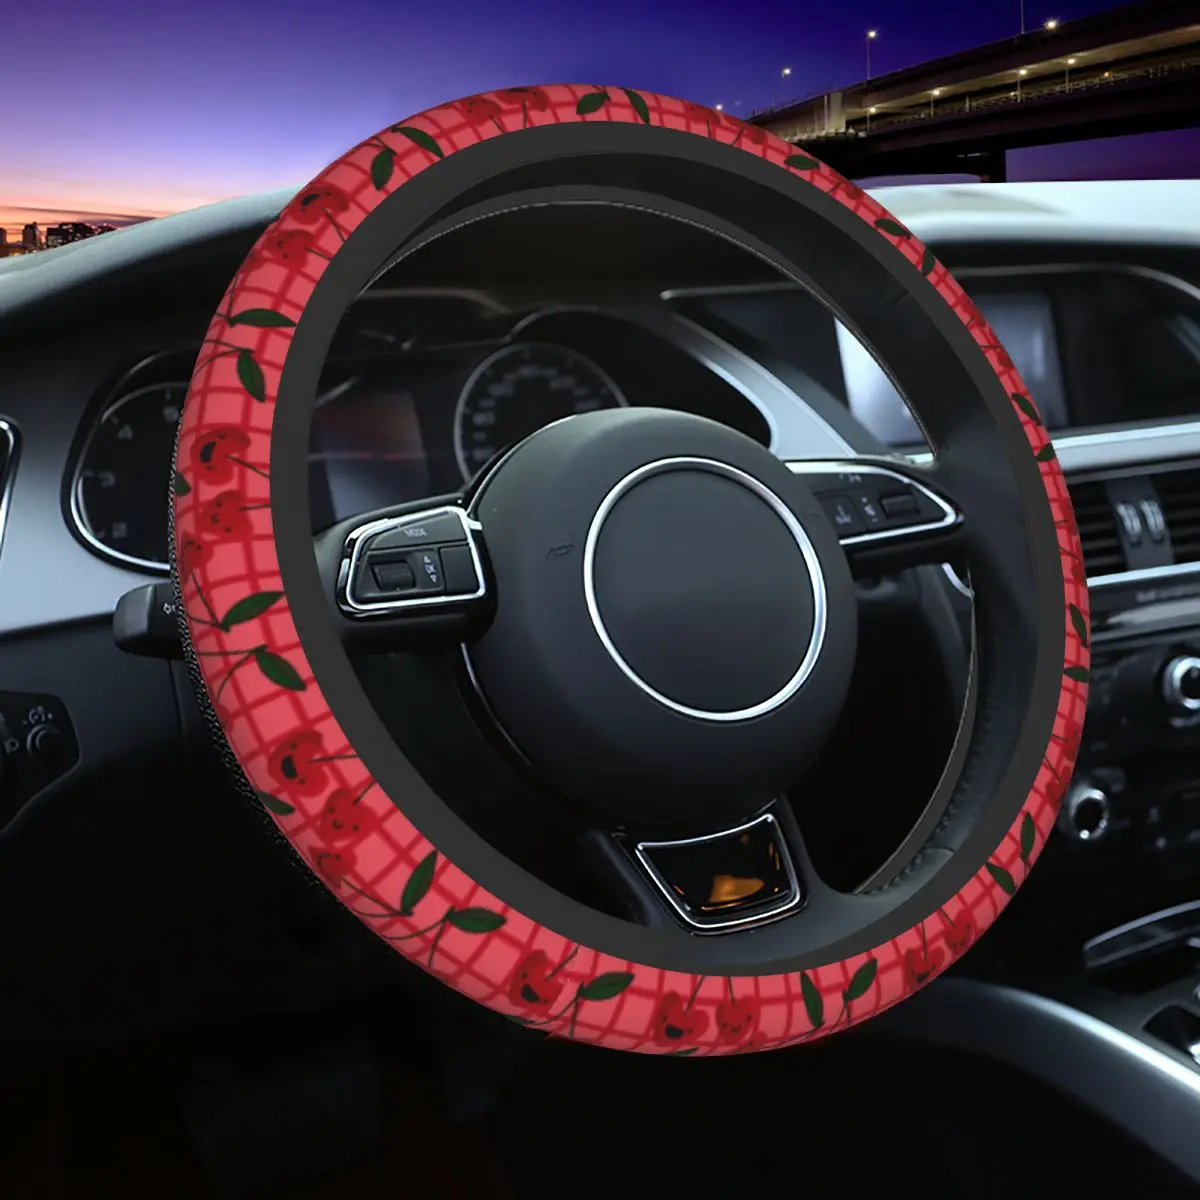 

38cm Car Steering Wheel Cover Cherry Fruit Plaid Universal Collage Braid On The Steering Wheel Cover Auto Automobile Accessory